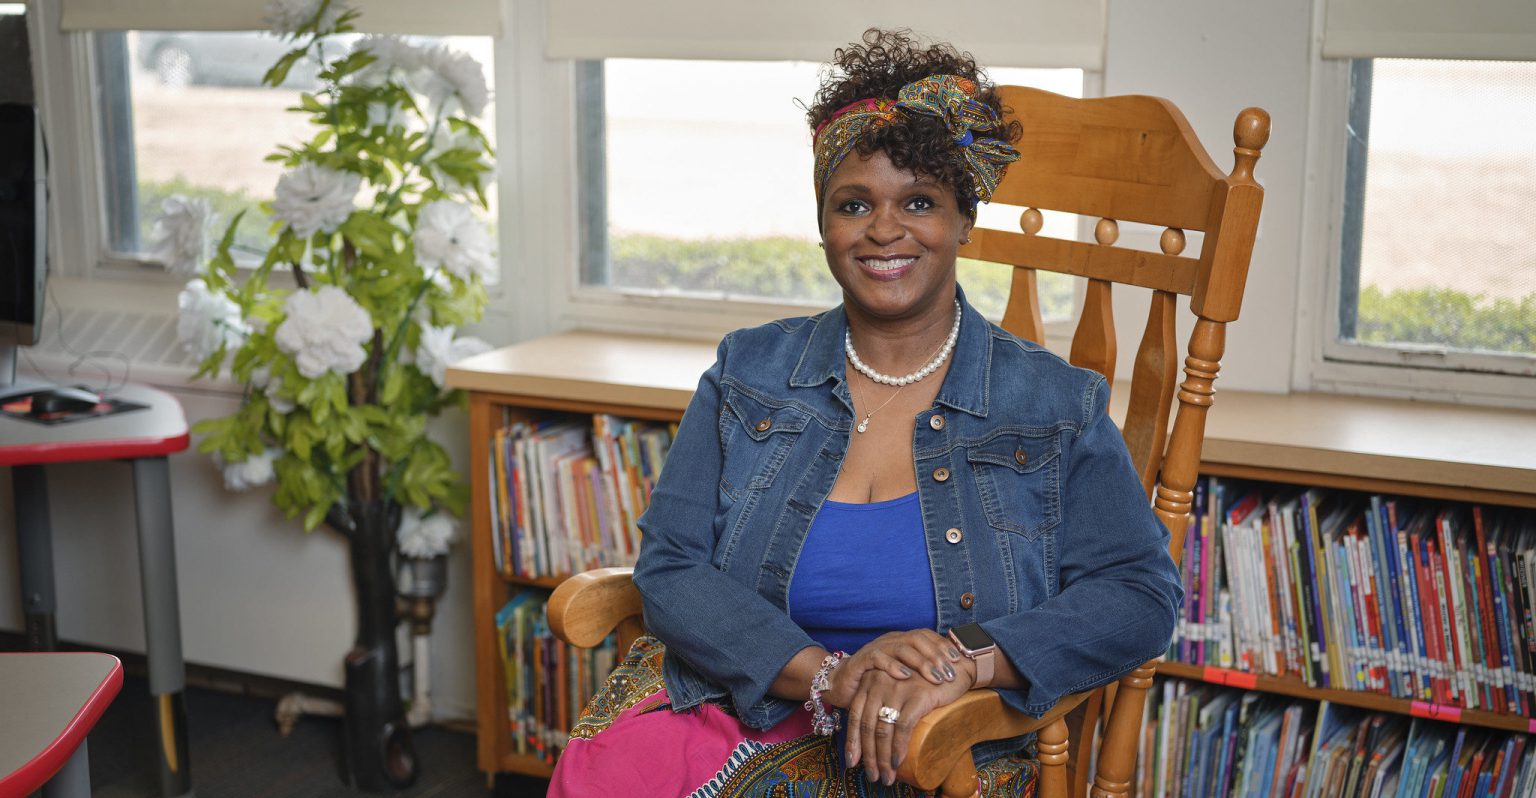 Librarian gets creative to instill literacy in students